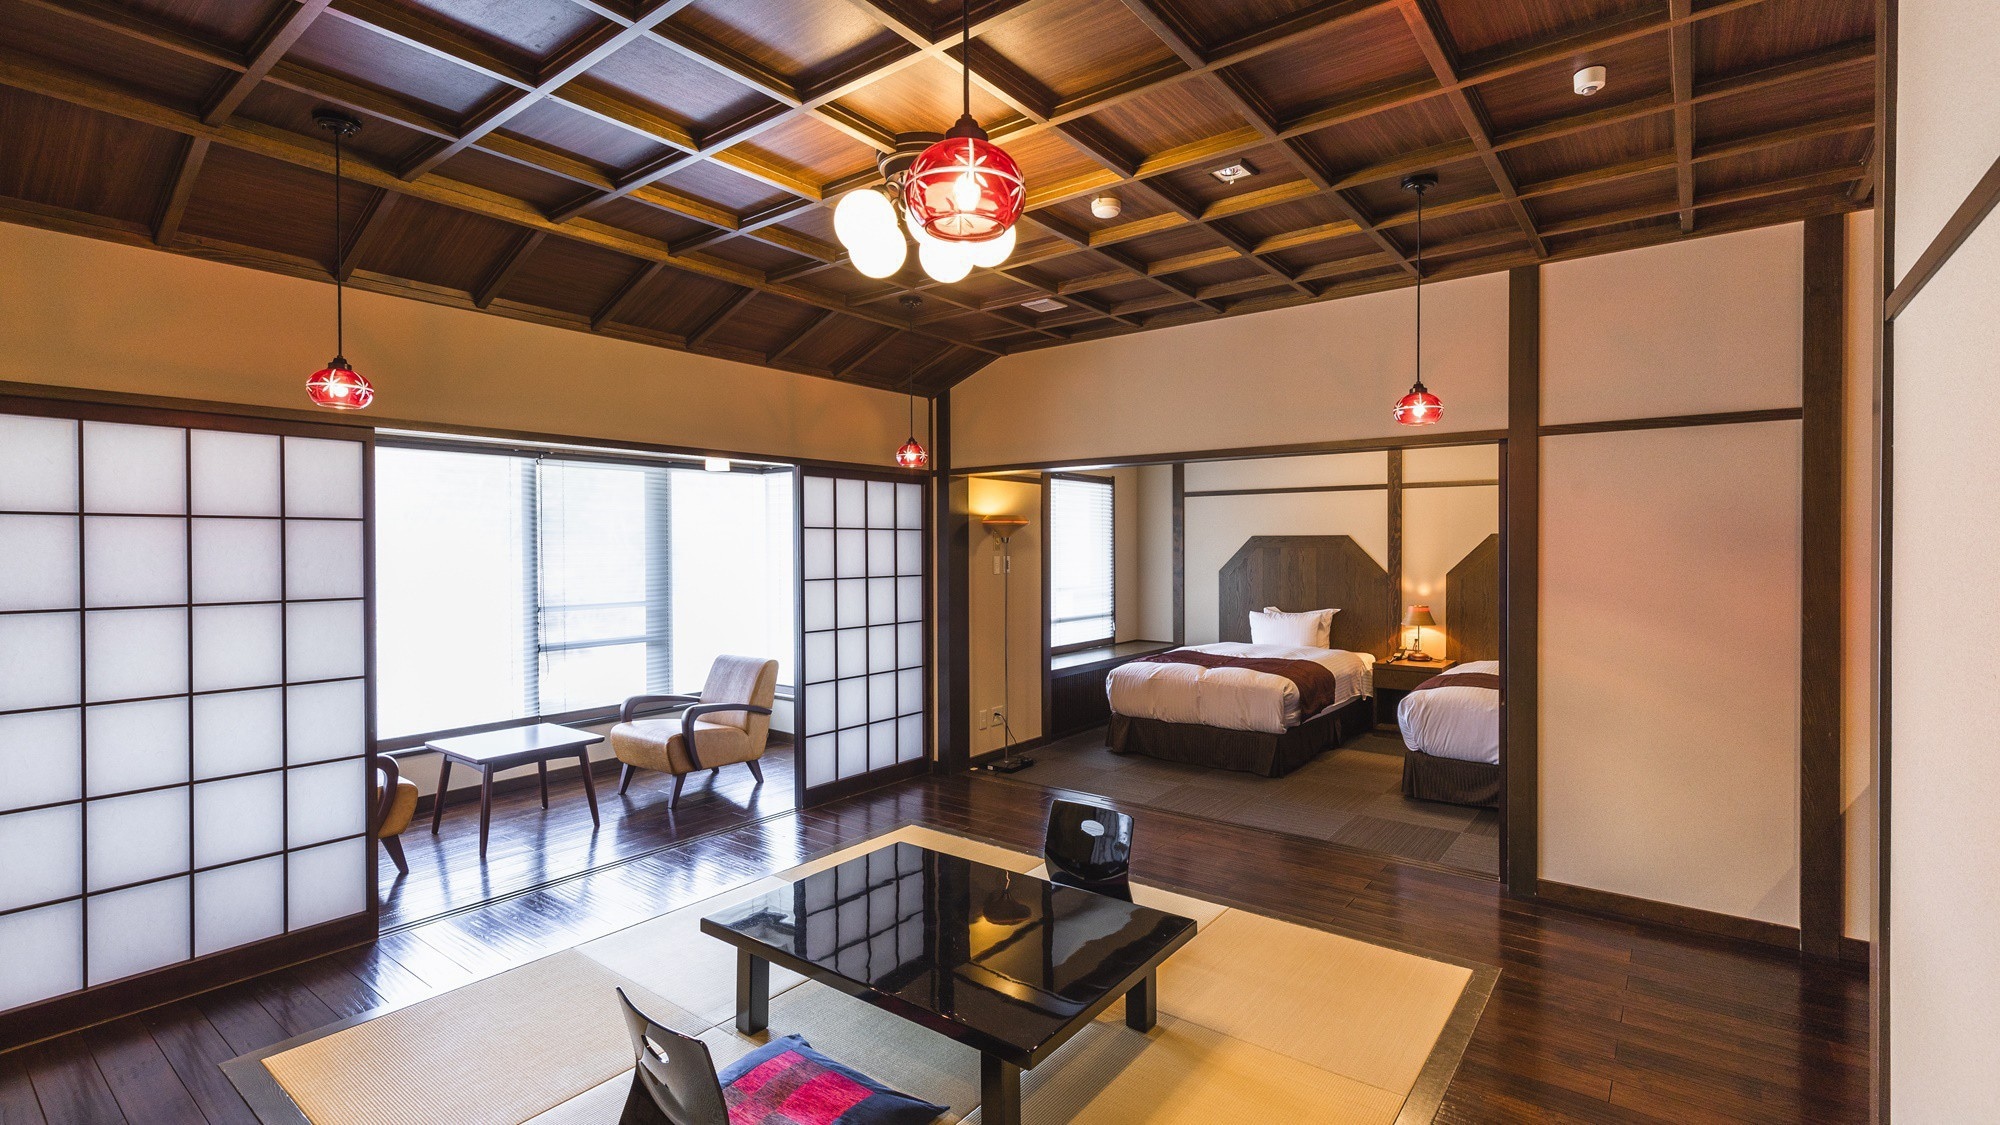 [Special room "Katsura"] Please relax in a comfortable space created by Japanese and Western styles, where you can feel the dignified beauty of being unadorned.